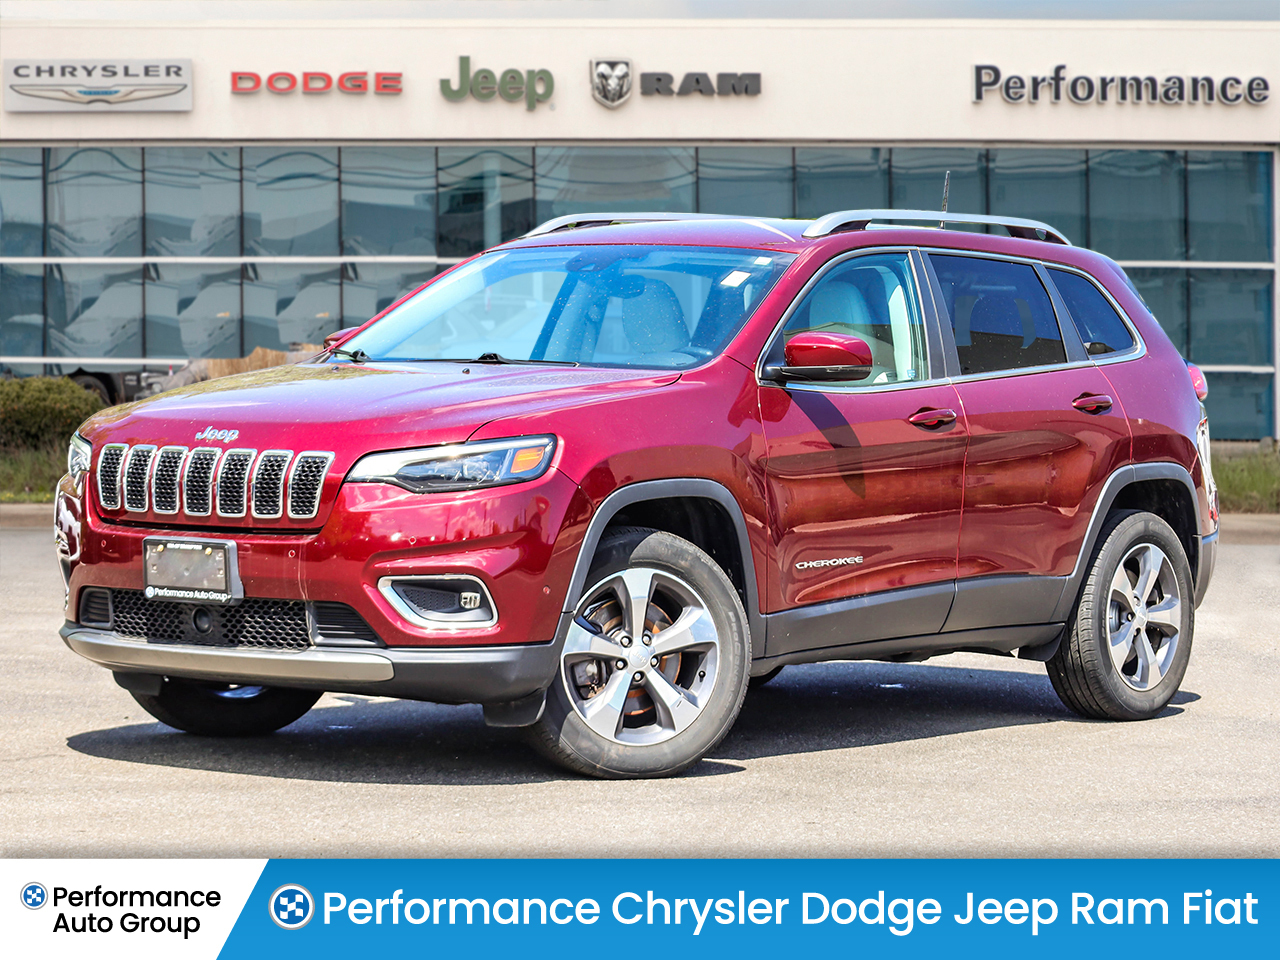 2019 Jeep Cherokee LIMITED*V6 4X4* LUXURY, TECHNOLOGY, SAFETY GROUPS*